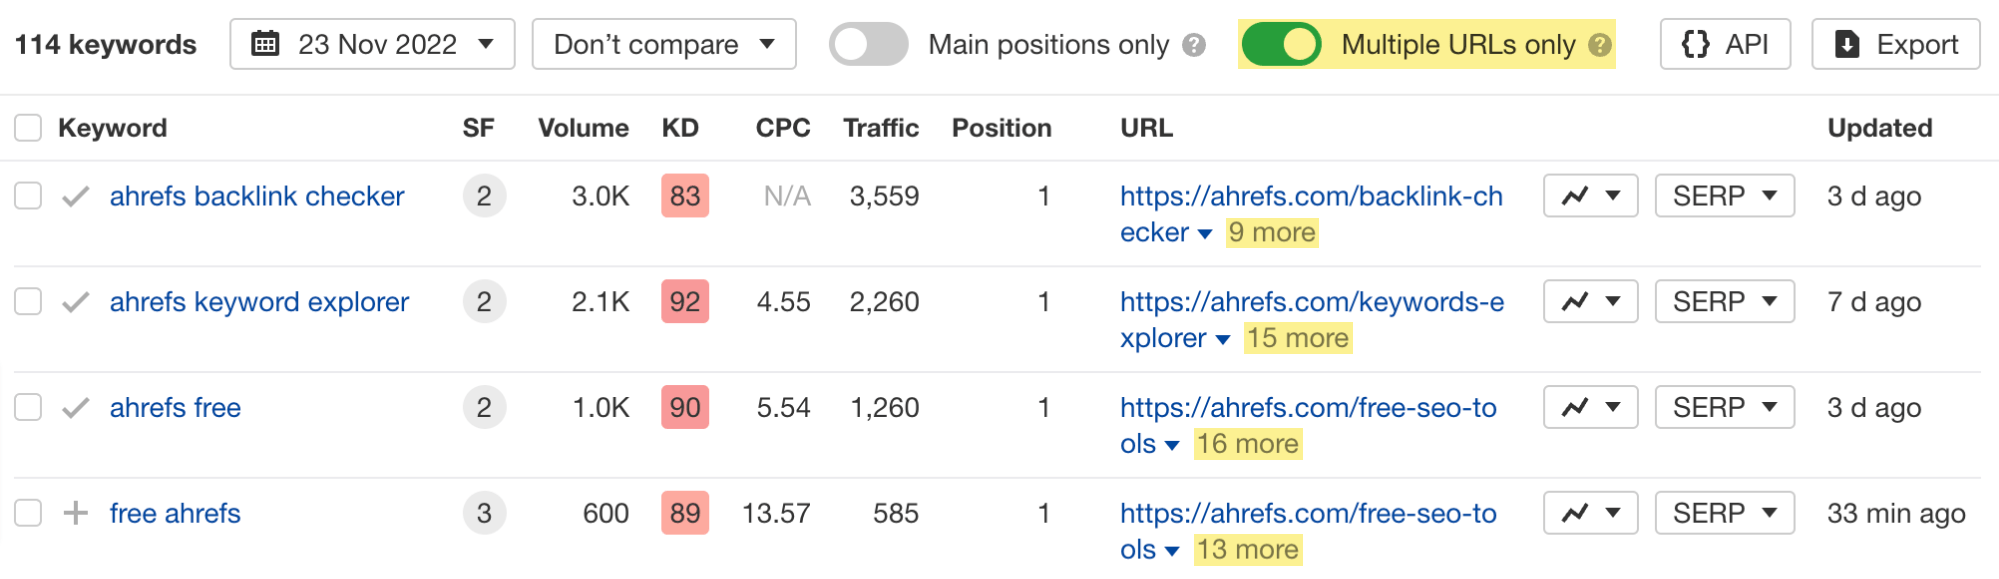 Ahrefs' Site Explorer showing potential keyword cannibalization issues